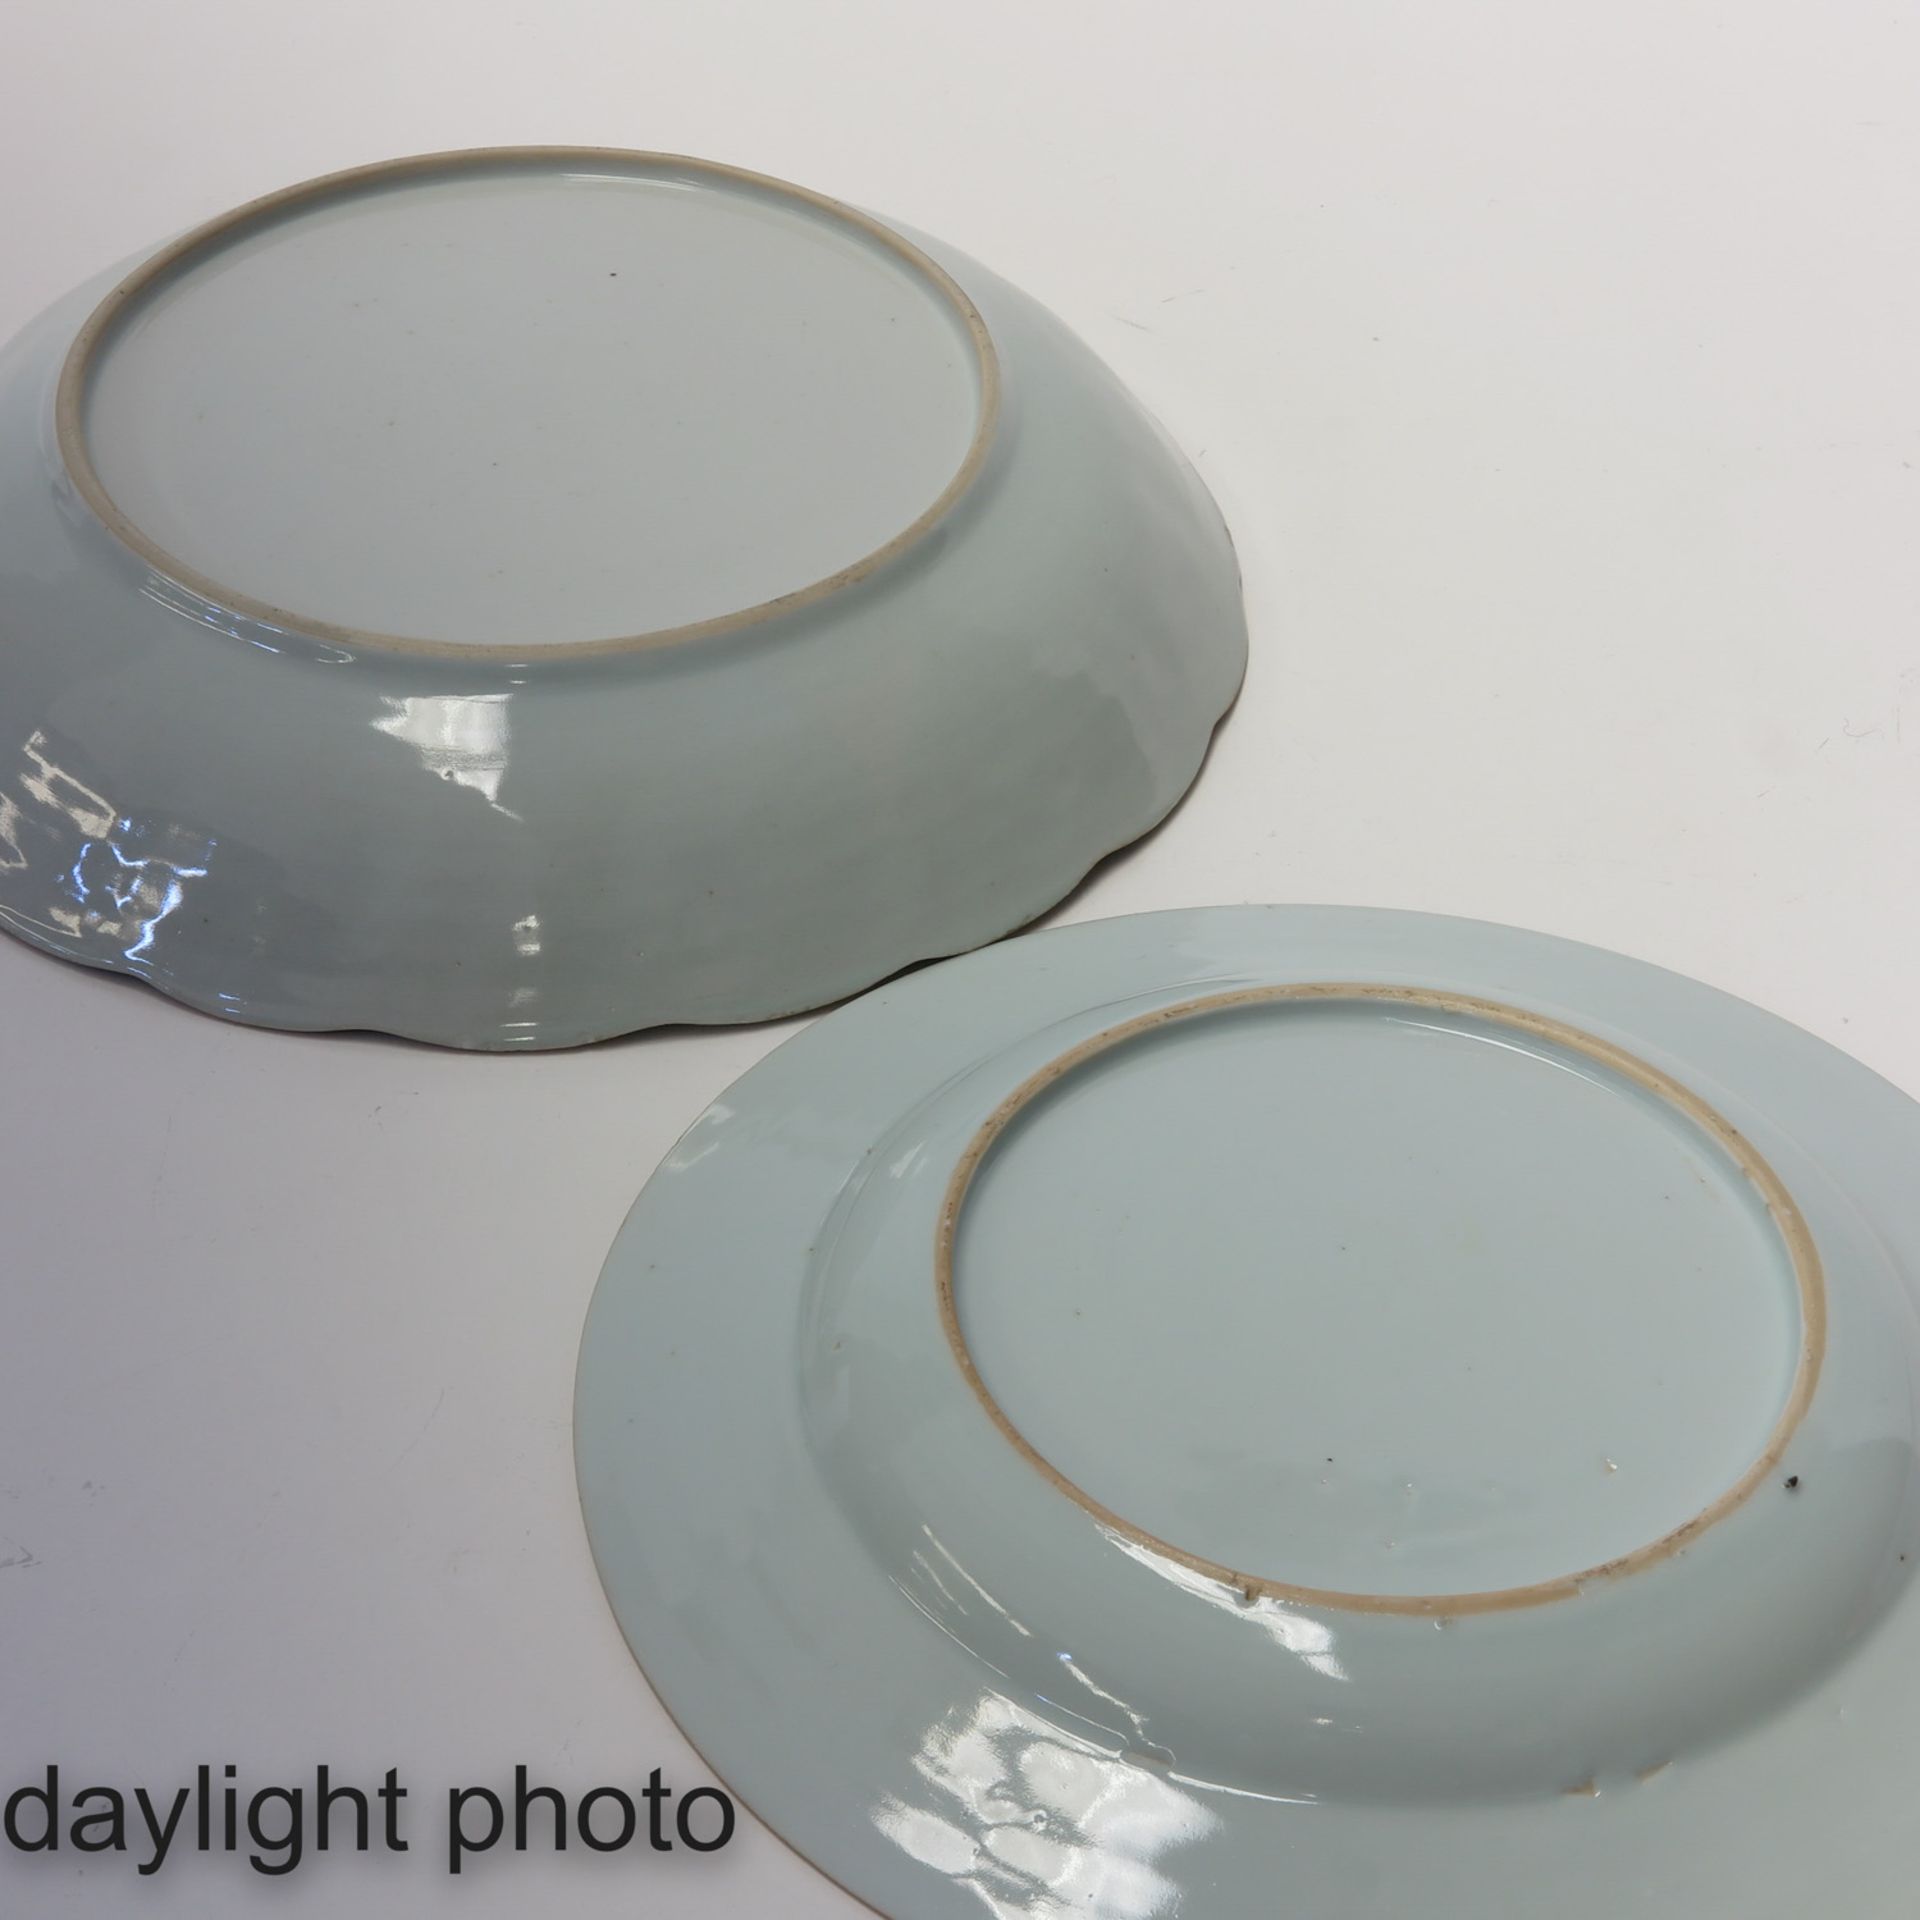 A Collection of 3 Blue and White Plates - Image 10 of 10